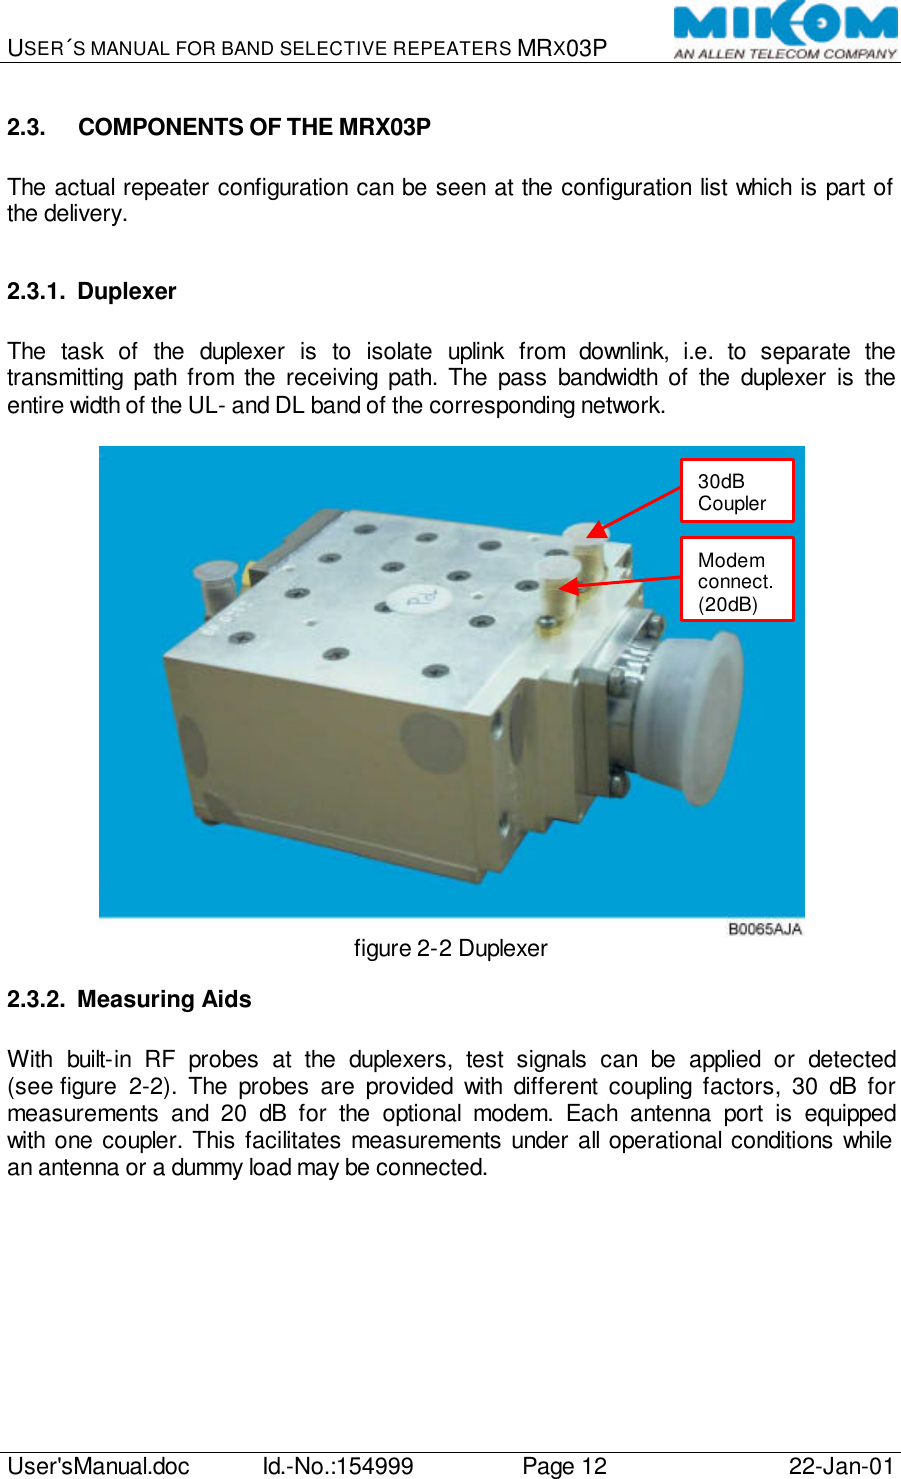 USER´S MANUAL FOR BAND SELECTIVE REPEATERS MRX03P   User&apos;sManual.doc Id.-No.:154999 Page 12 22-Jan-01  2.3. COMPONENTS OF THE MRX03P  The actual repeater configuration can be seen at the configuration list which is part of the delivery.  2.3.1. Duplexer  The task of the duplexer is to isolate uplink from downlink, i.e. to separate the transmitting path from the receiving path. The pass bandwidth of the duplexer is the entire width of the UL- and DL band of the corresponding network.   figure 2-2 Duplexer 2.3.2. Measuring Aids  With built-in RF probes at the duplexers, test signals can be applied or detected (see figure  2-2). The probes are provided with different coupling factors, 30 dB for measurements and 20 dB for the optional modem. Each antenna port is equipped with one coupler. This facilitates measurements under all operational conditions while an antenna or a dummy load may be connected.  Modem connect. (20dB) 30dB Coupler 